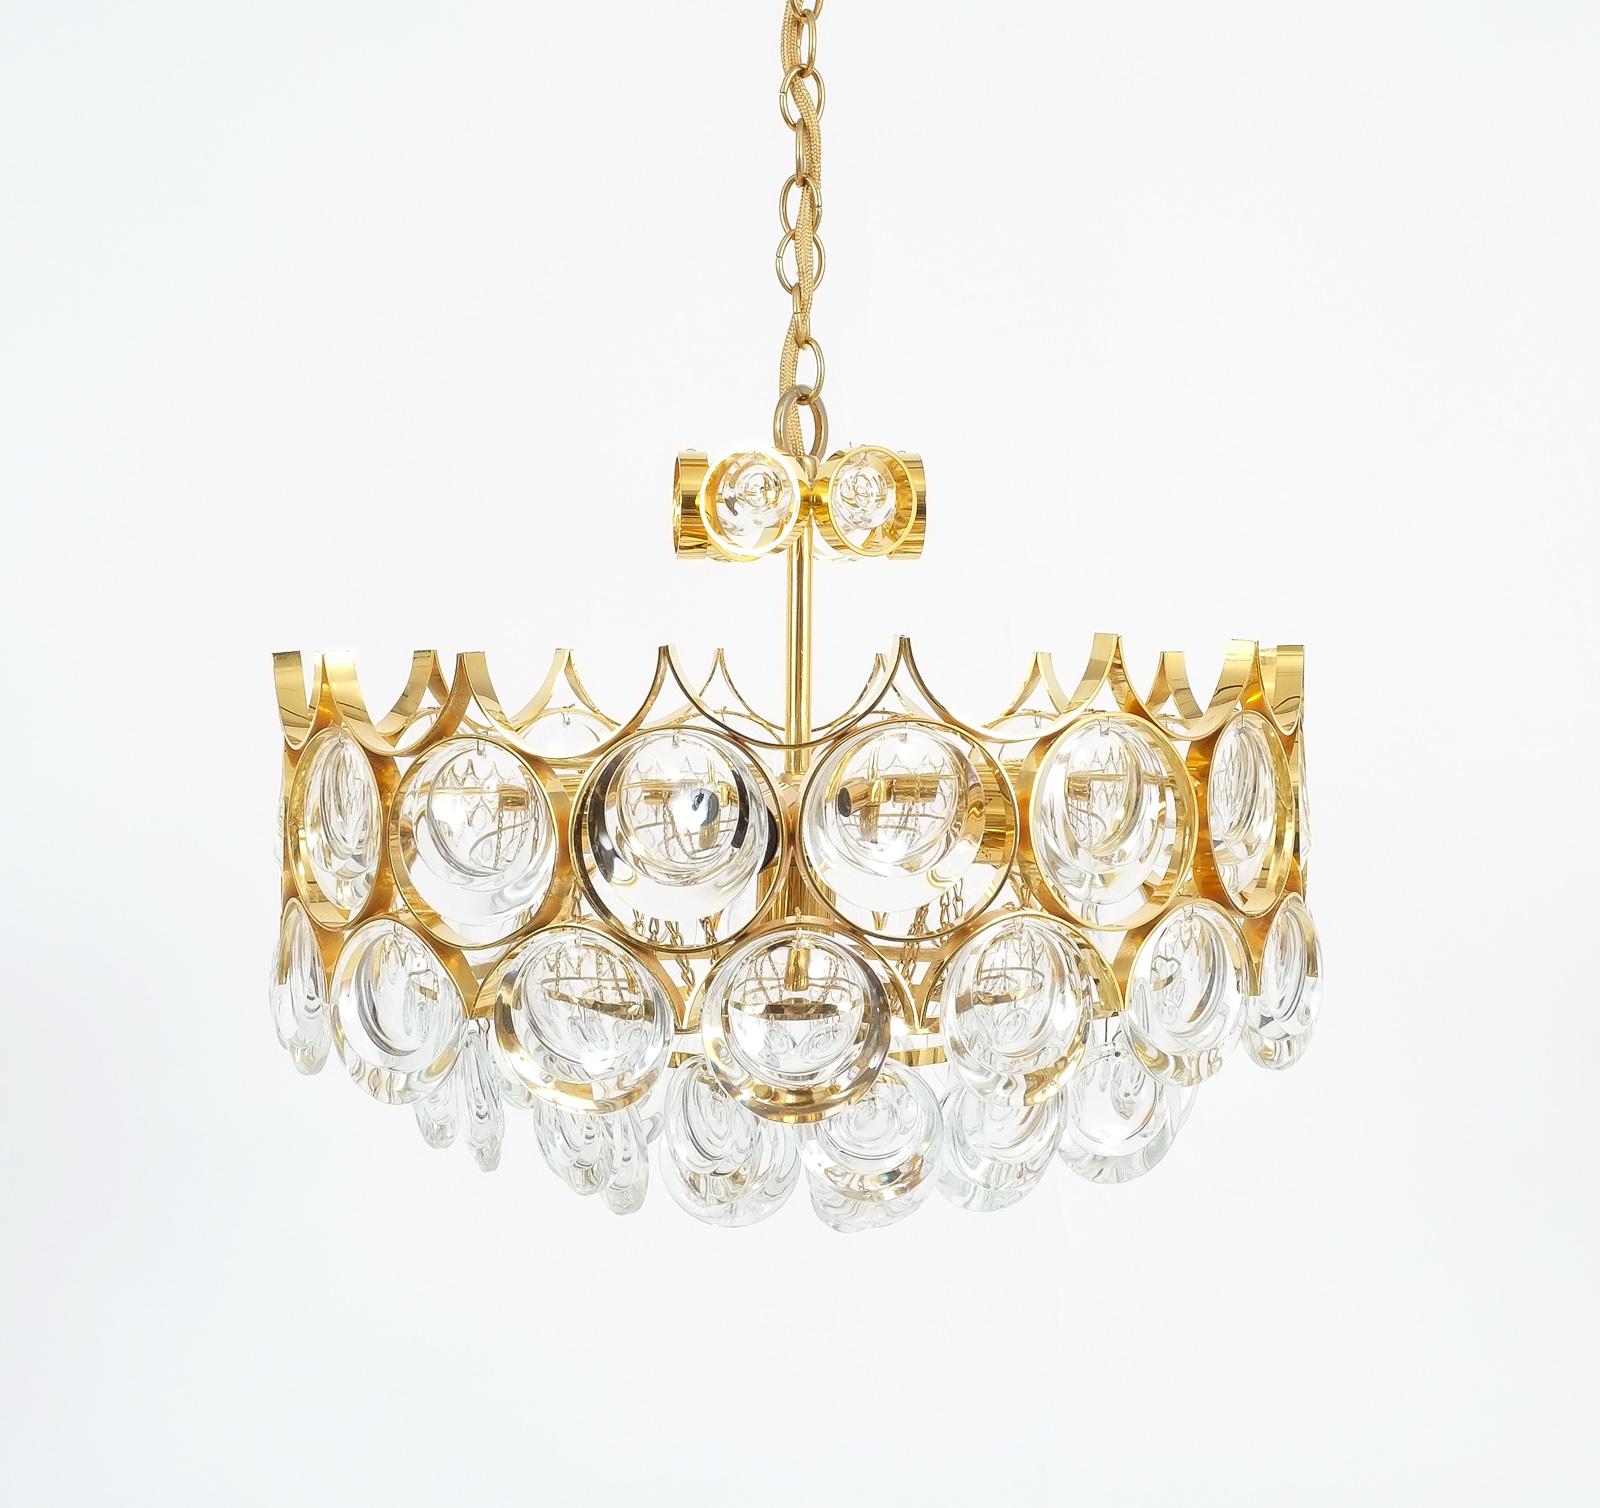 Gilt Palwa Chandeliers Lamps Set of 3 Petite Gold Brass Glass Refurbished, 1960 For Sale